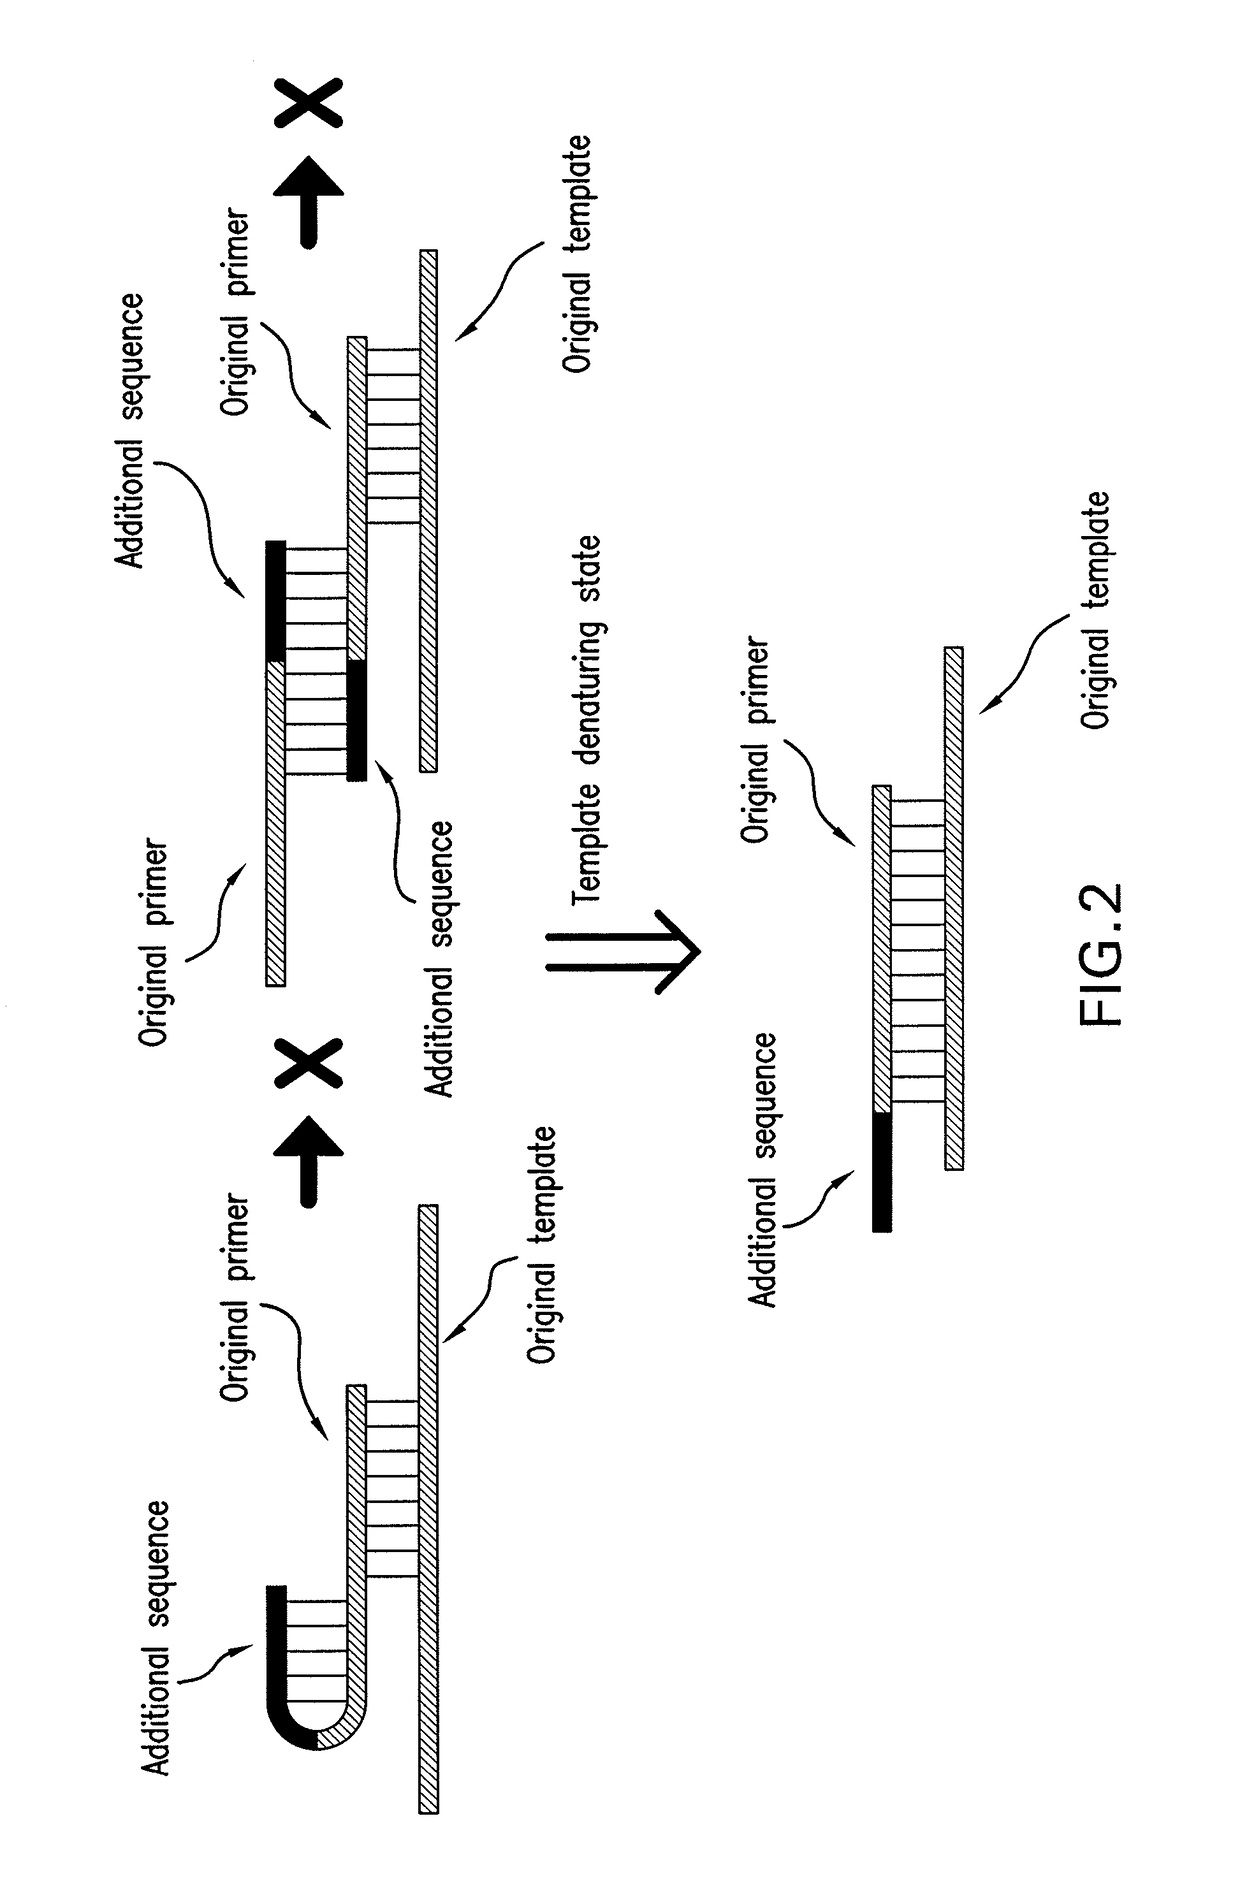 PCR primer capable of reducing non-specific amplification and PCR method using the PCR primer